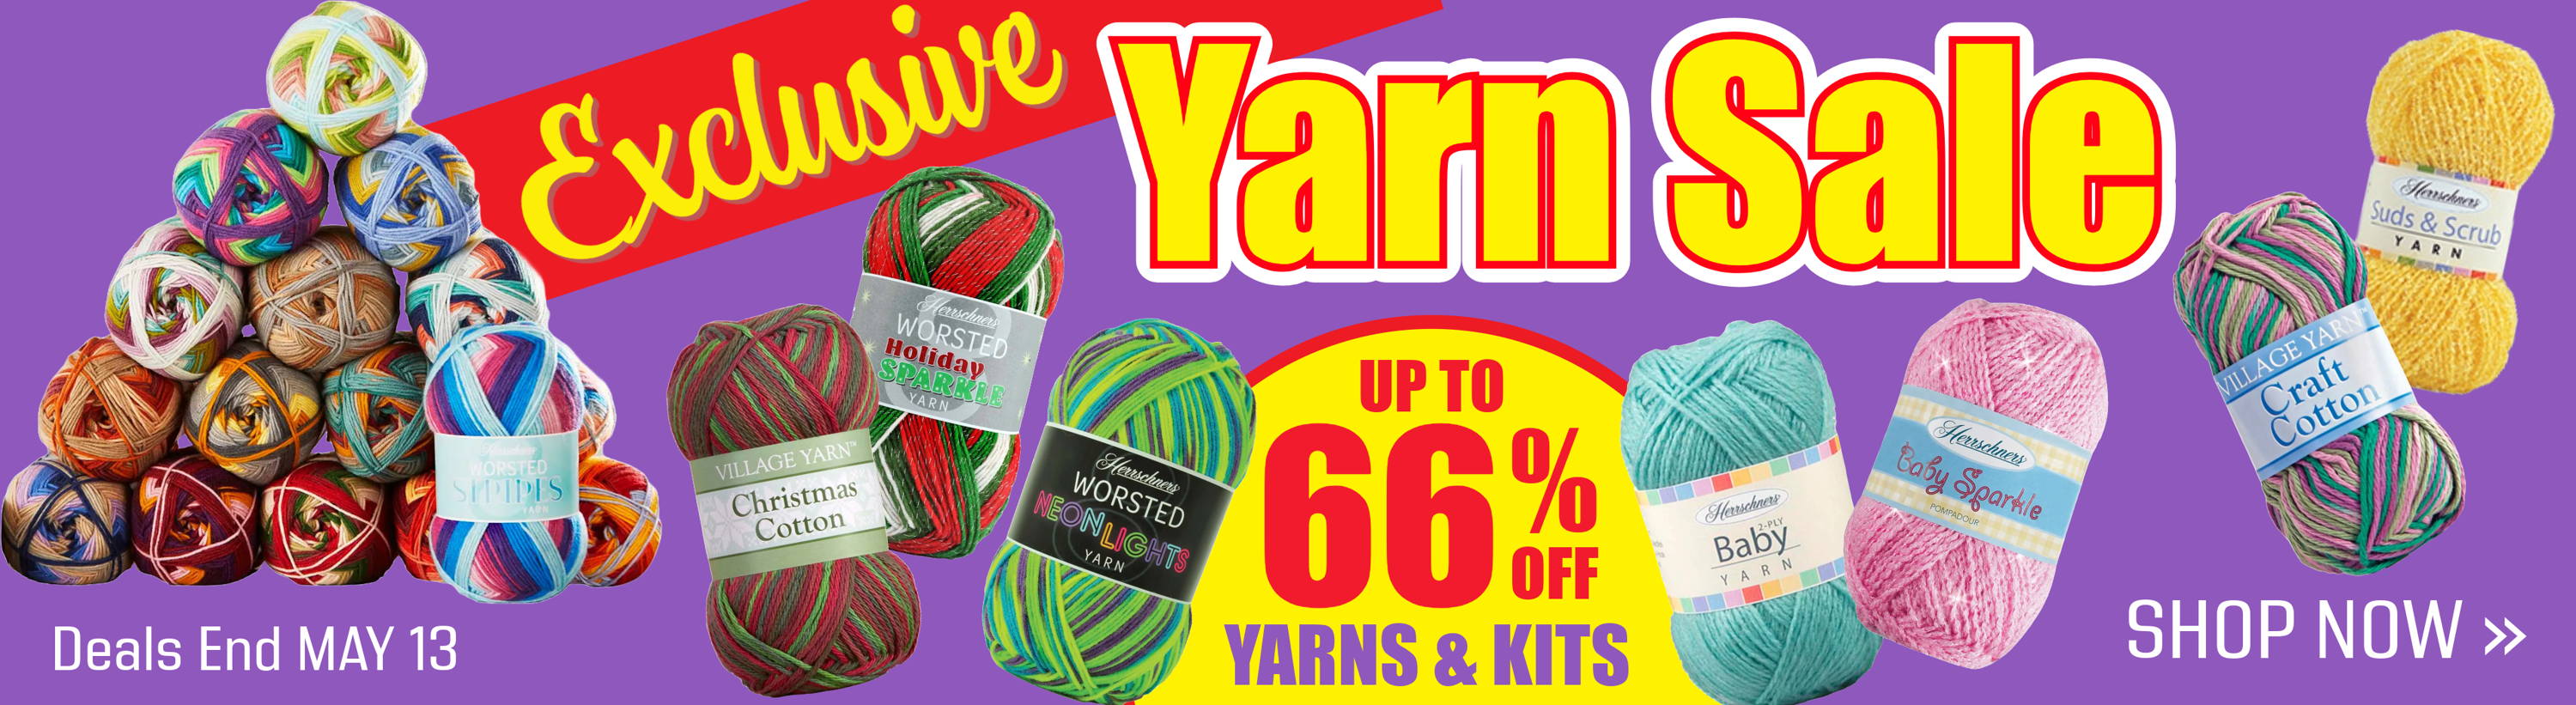 Exclusive Yarn Sale up to 66% Off Until May 13. Image: Herrschners Exclusive Yarns.